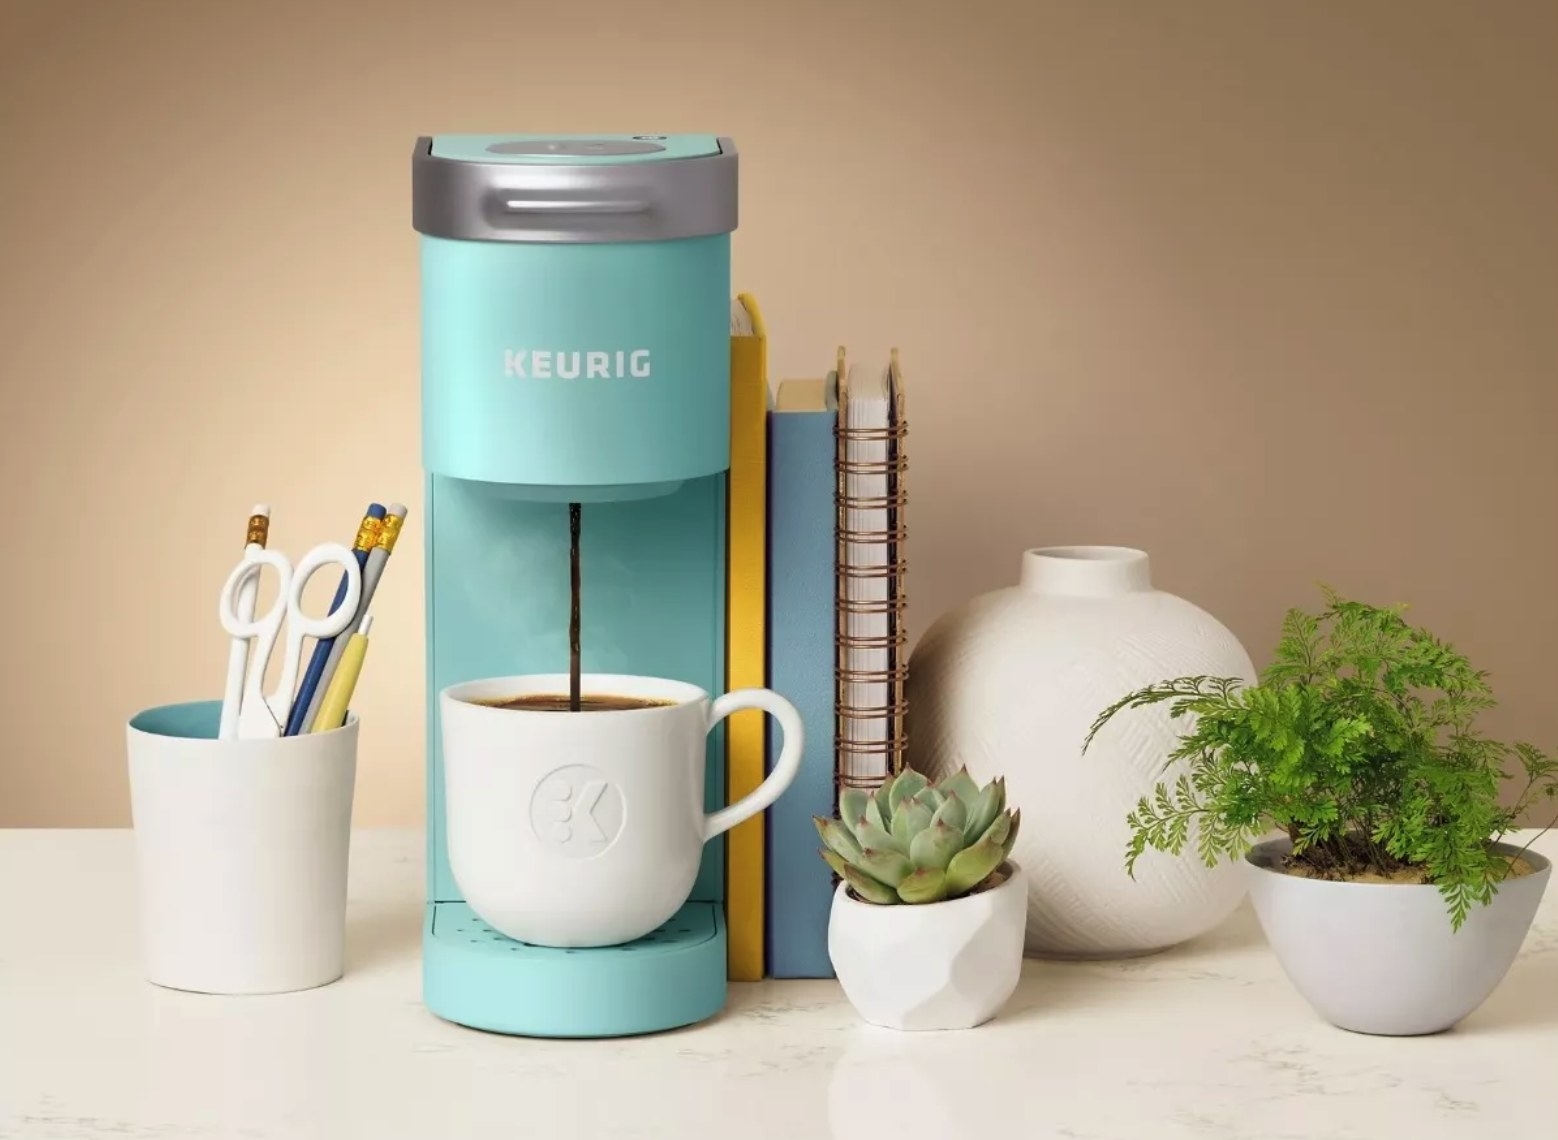 A turquoise Keurig making a cup of coffee next to books, plants, a vase, and a pencil cup.